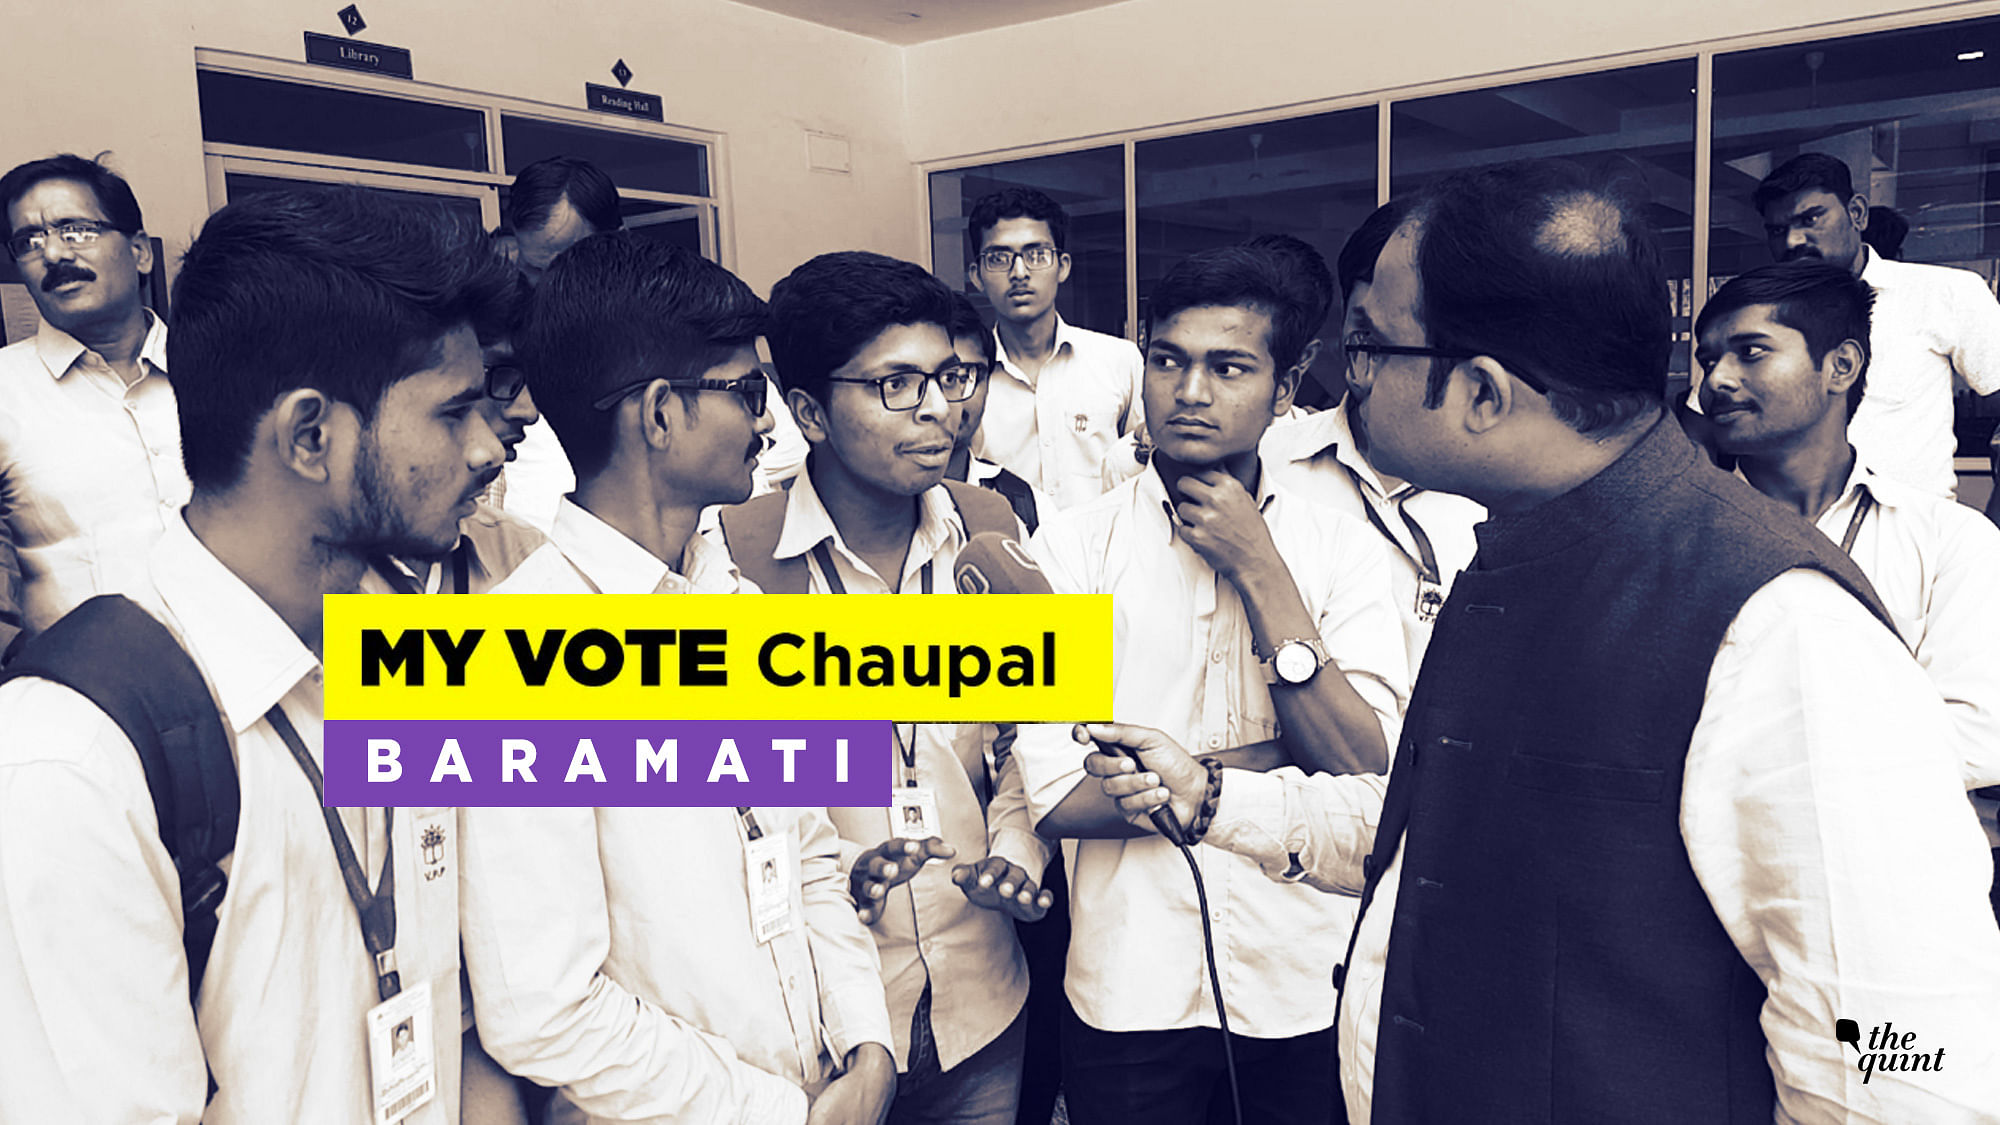 The Quint reached NCP chief Sharad Pawar’s constituency Baramati to find what issues they keep in mind while voting.